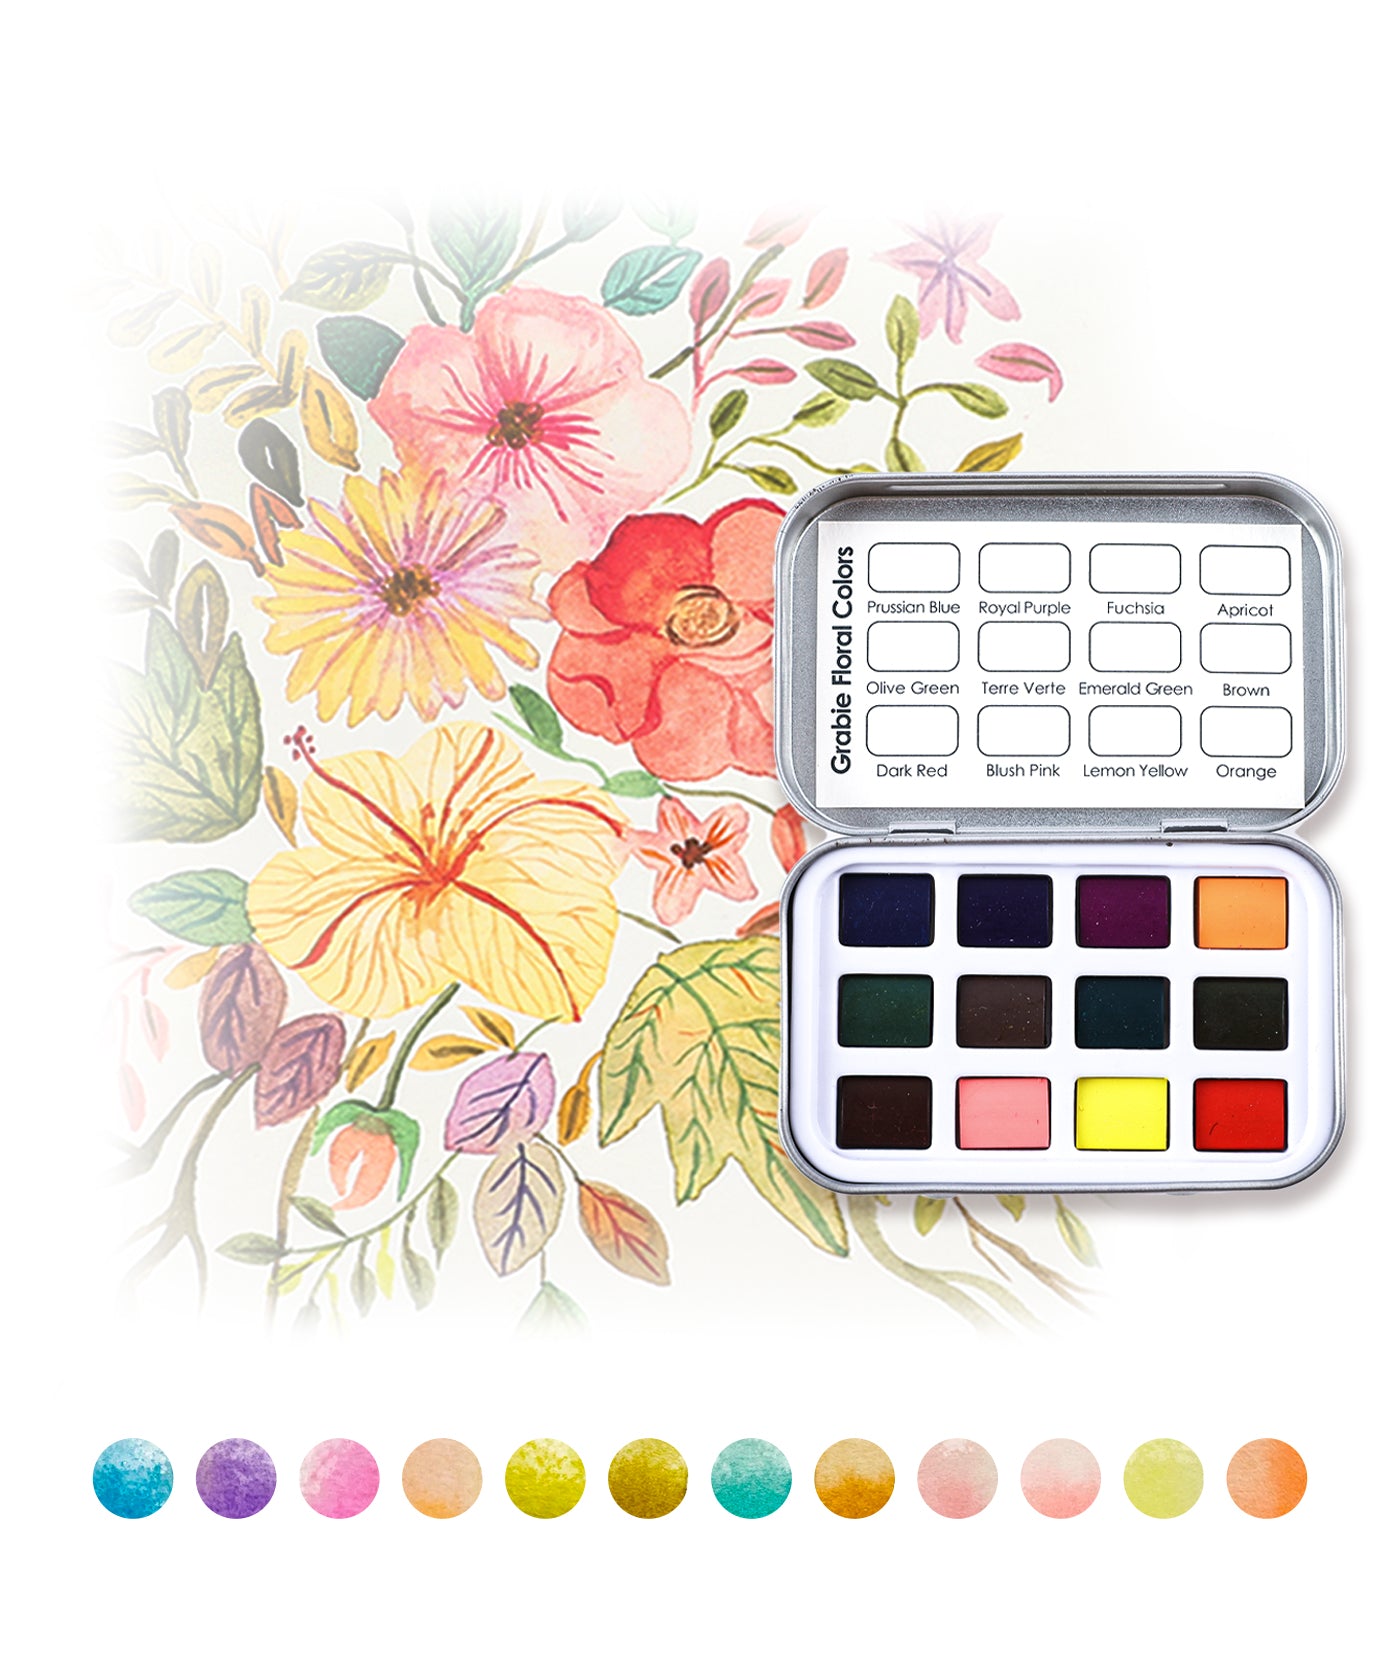 Grabie 100-Color Watercolor Paint Set - Artistic Brilliance in Every Hue.